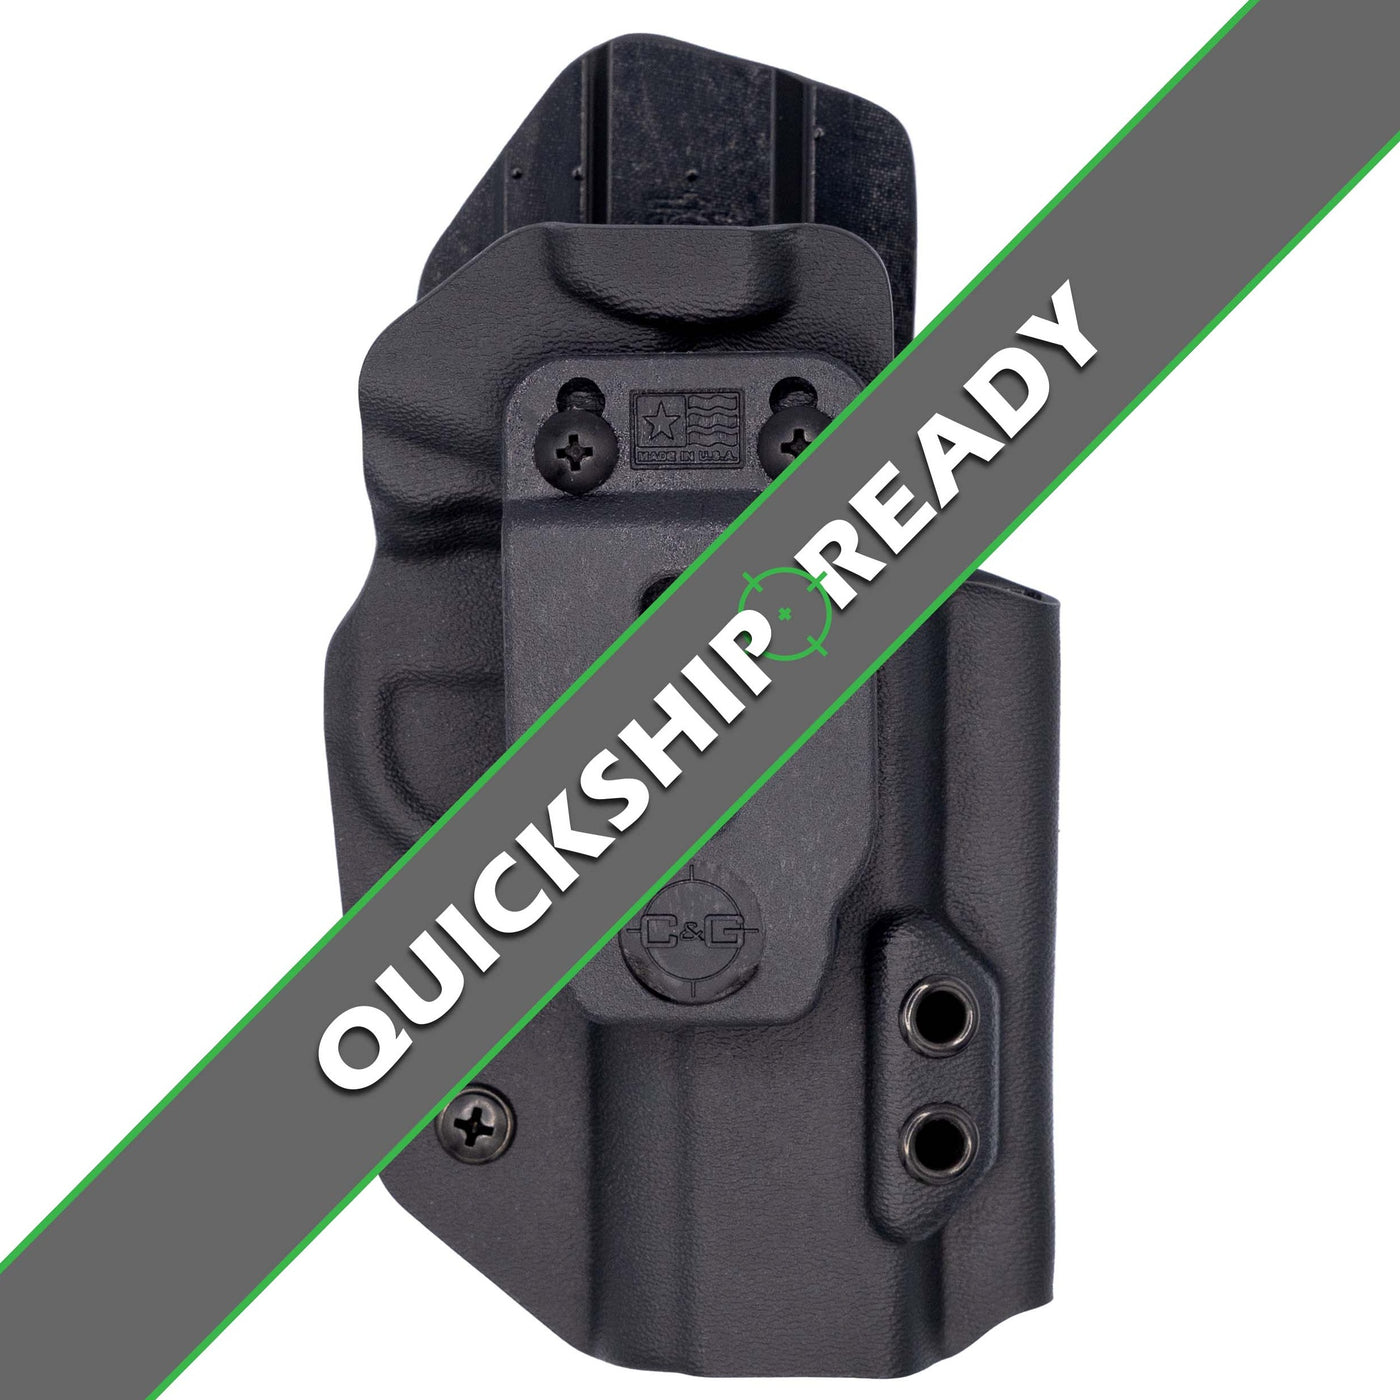 1911 3.5" IWB Covert Kydex Holster with the Quickship banner overlay showing that it ships within 0-5 business days